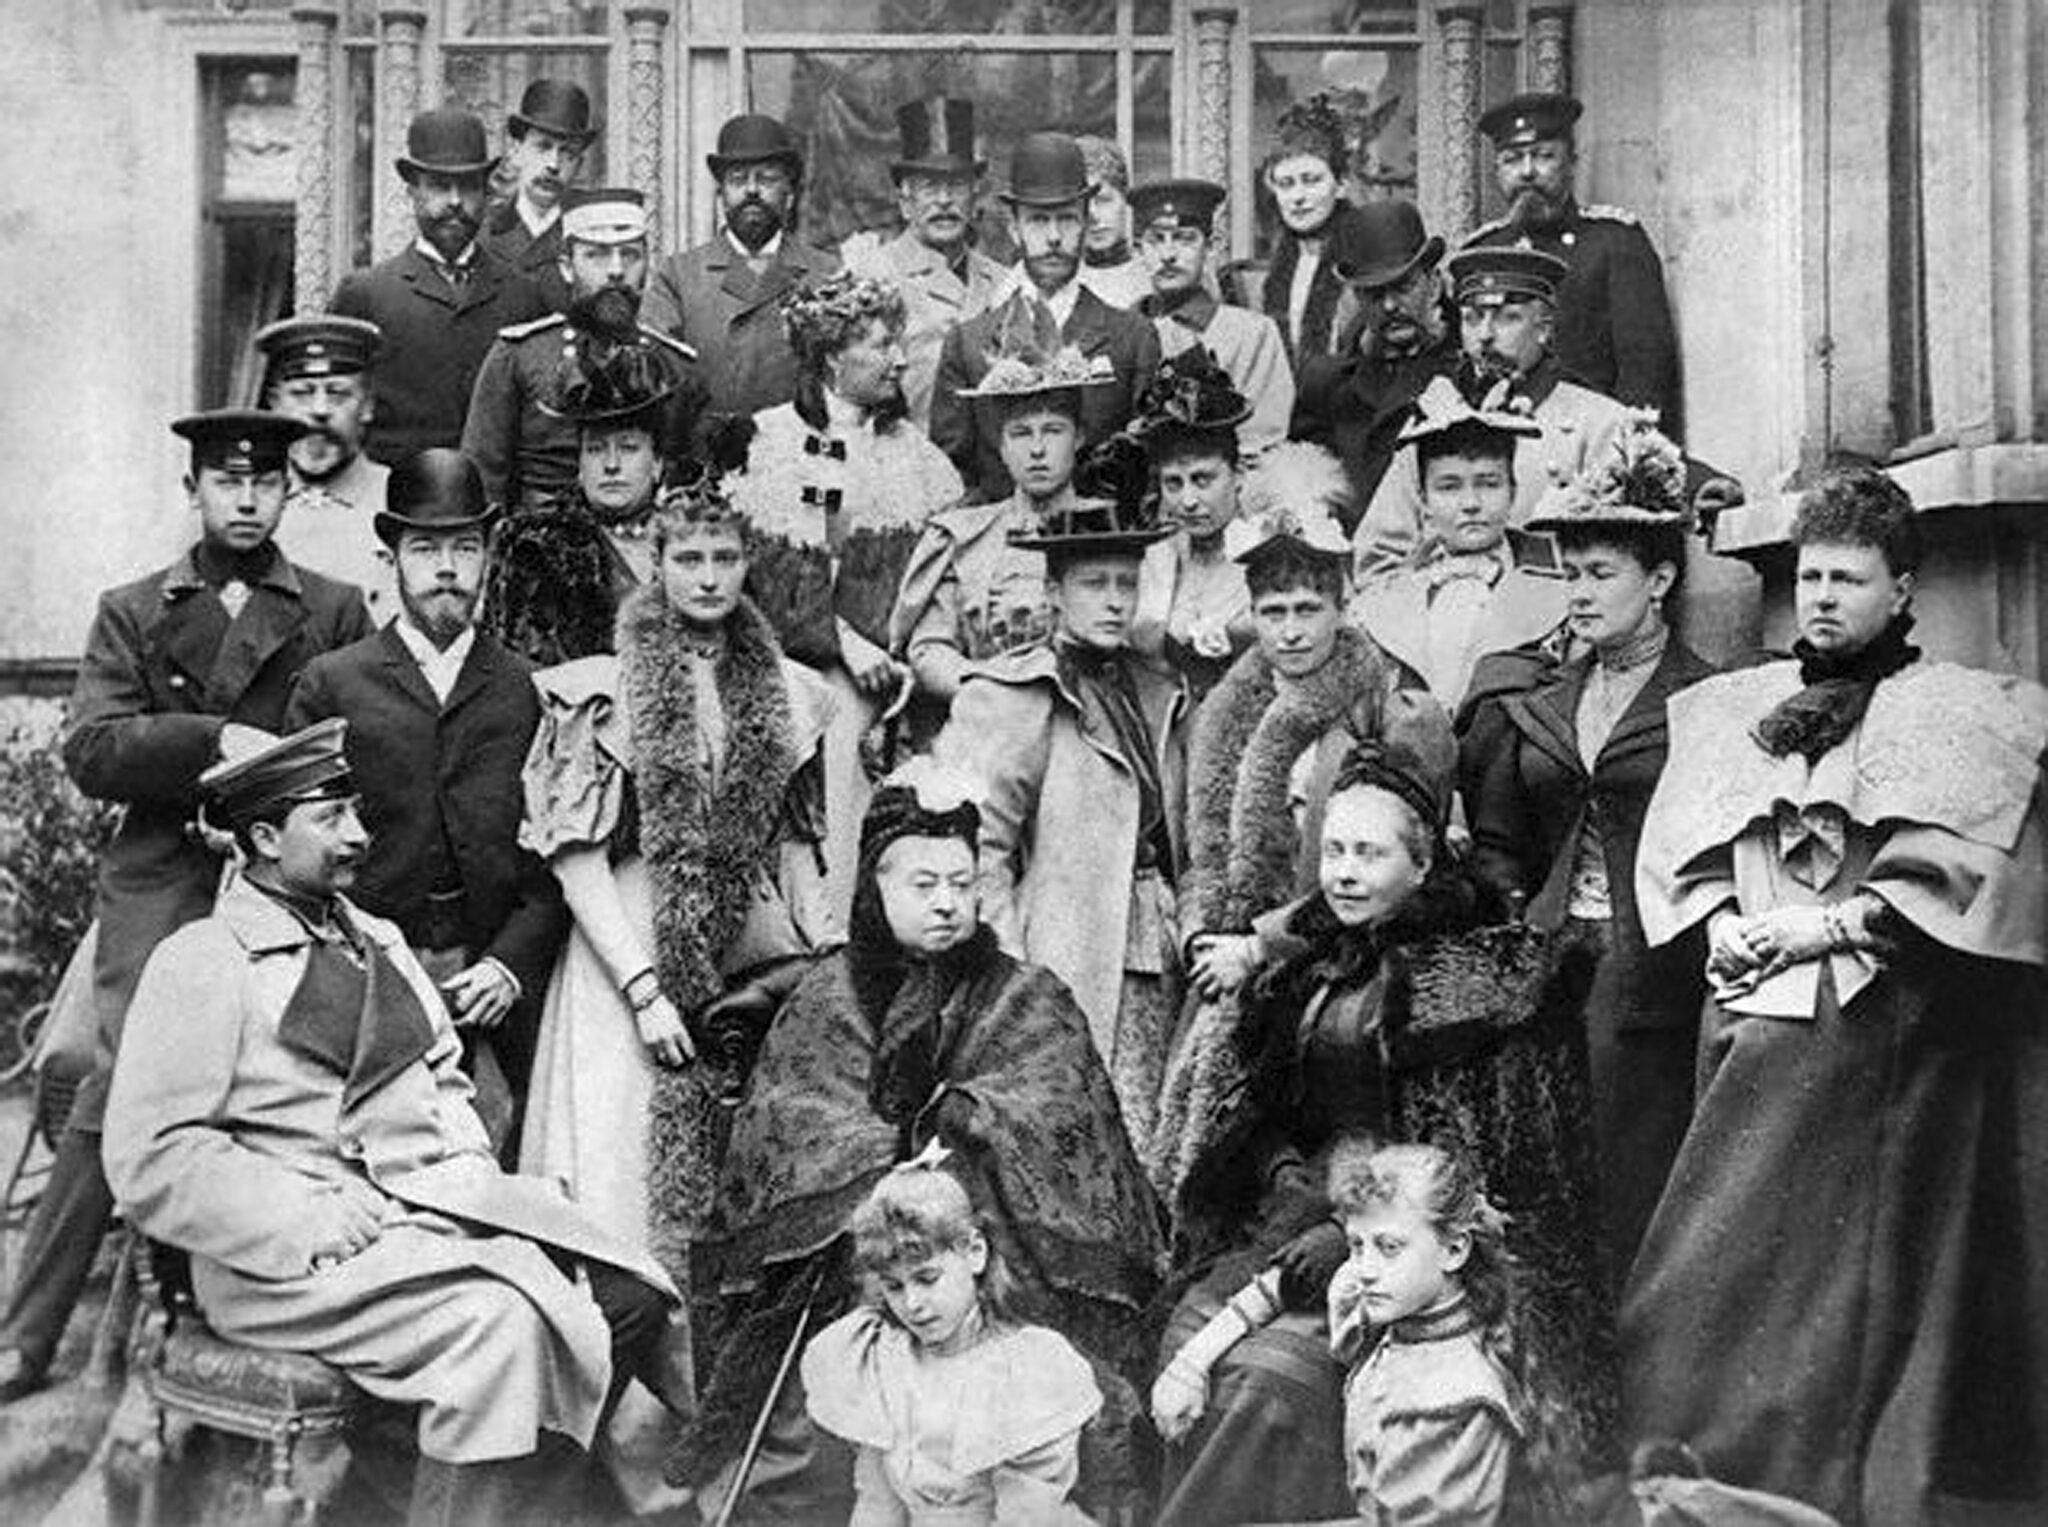 Queen Victoria with her family, 1894.